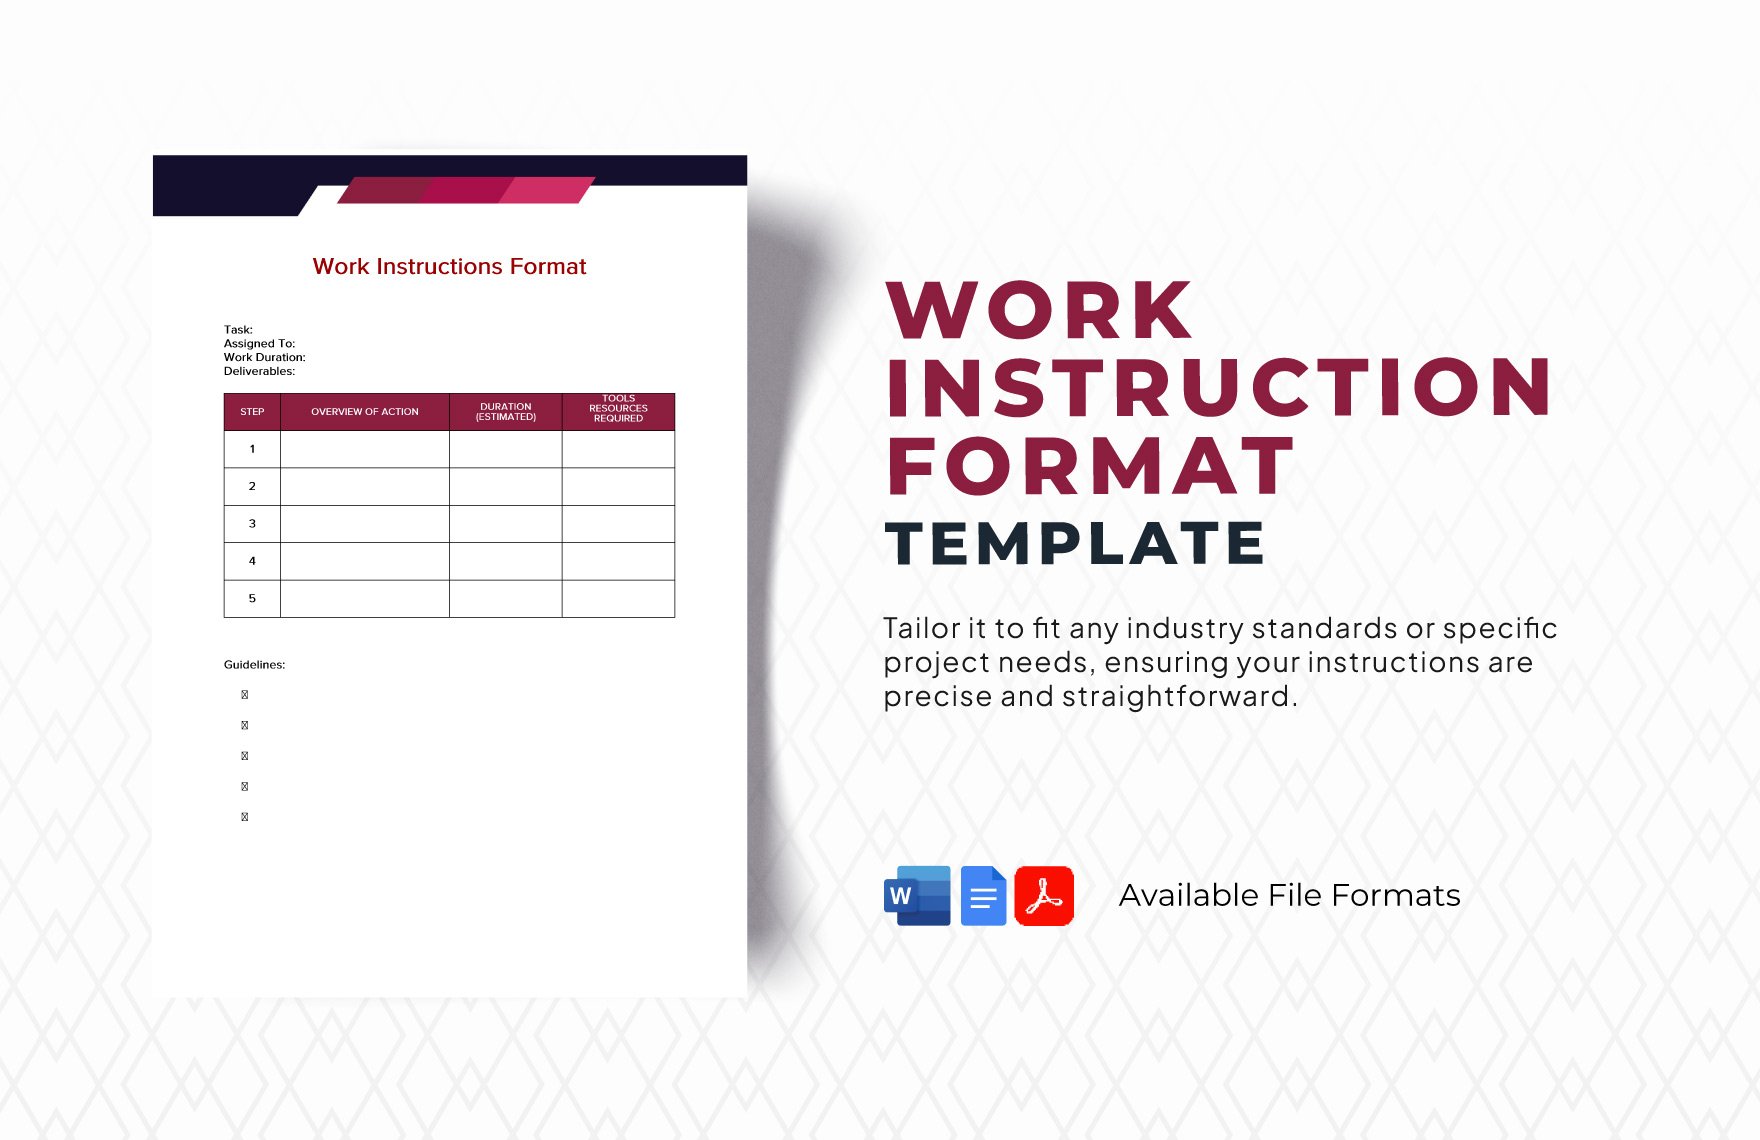 Work Instruction Format Template